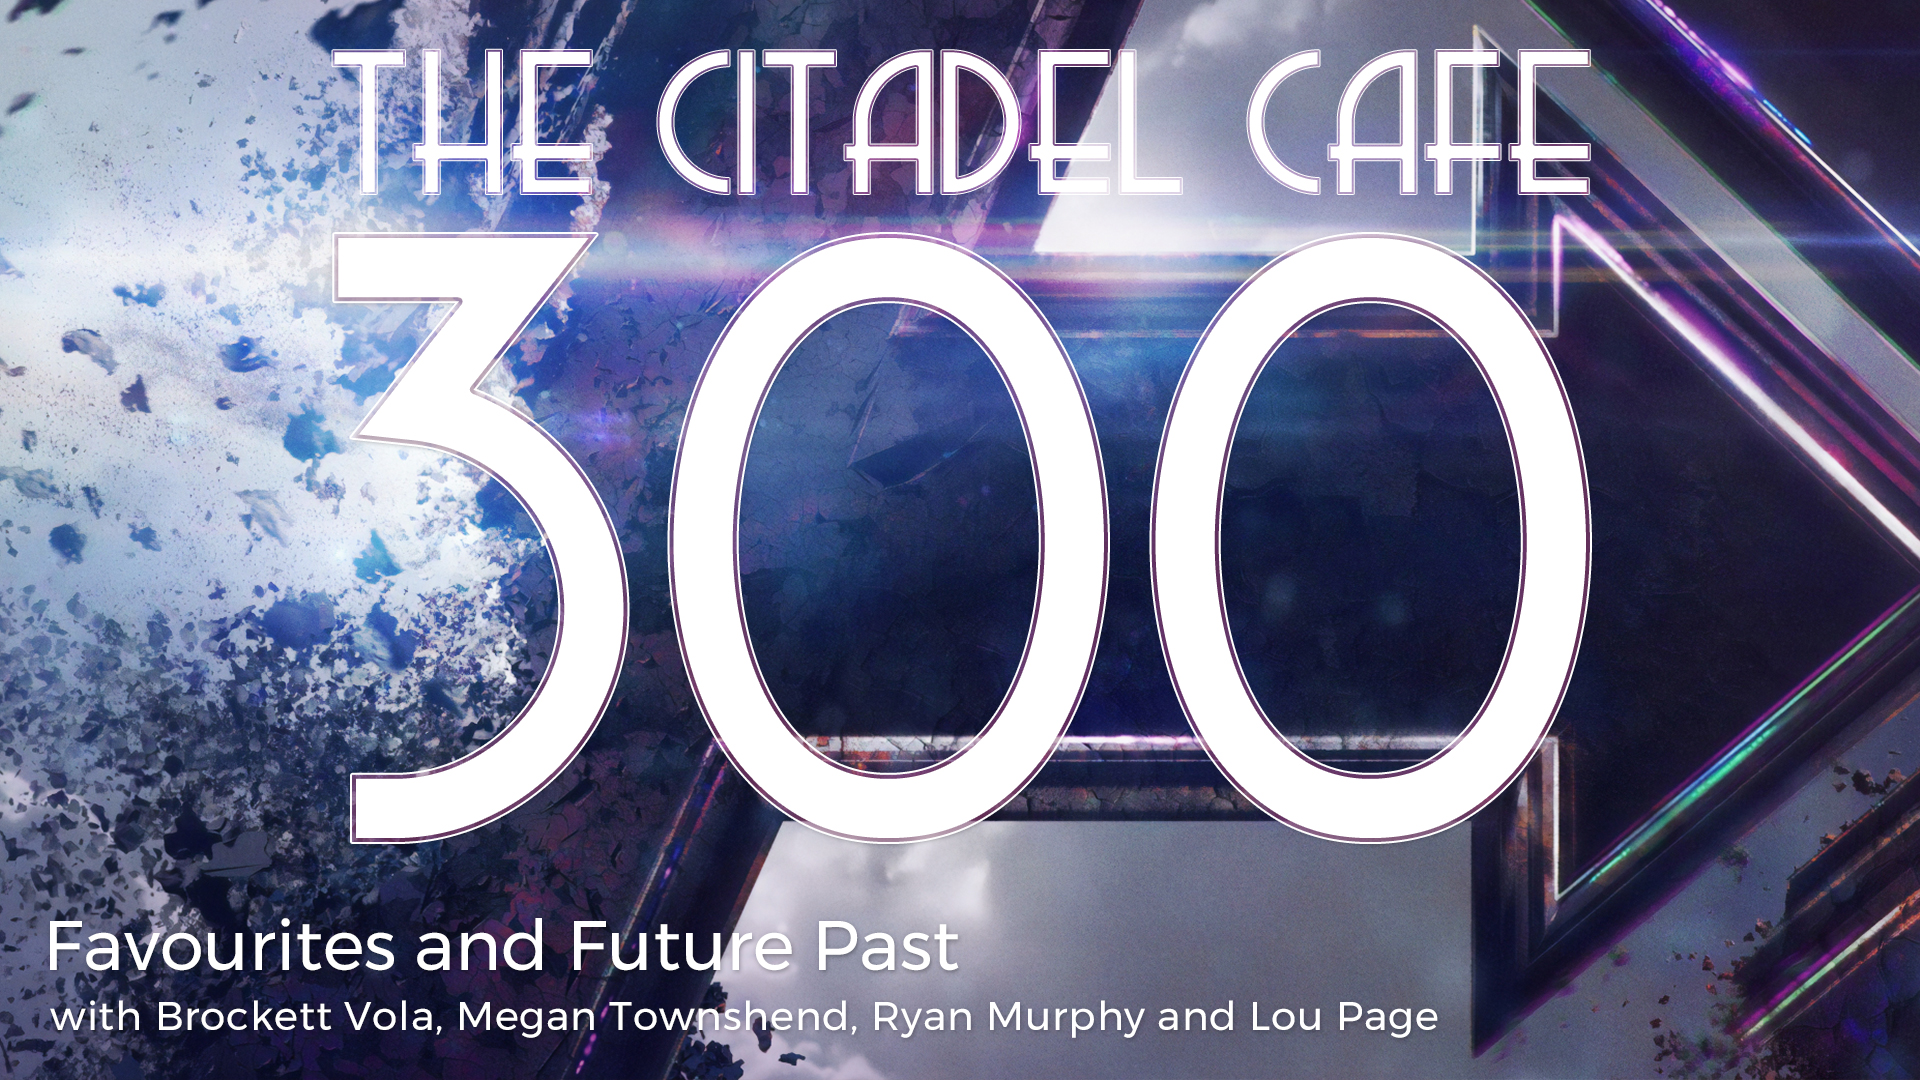 The Citadel Cafe 300: Favourites and Future Past